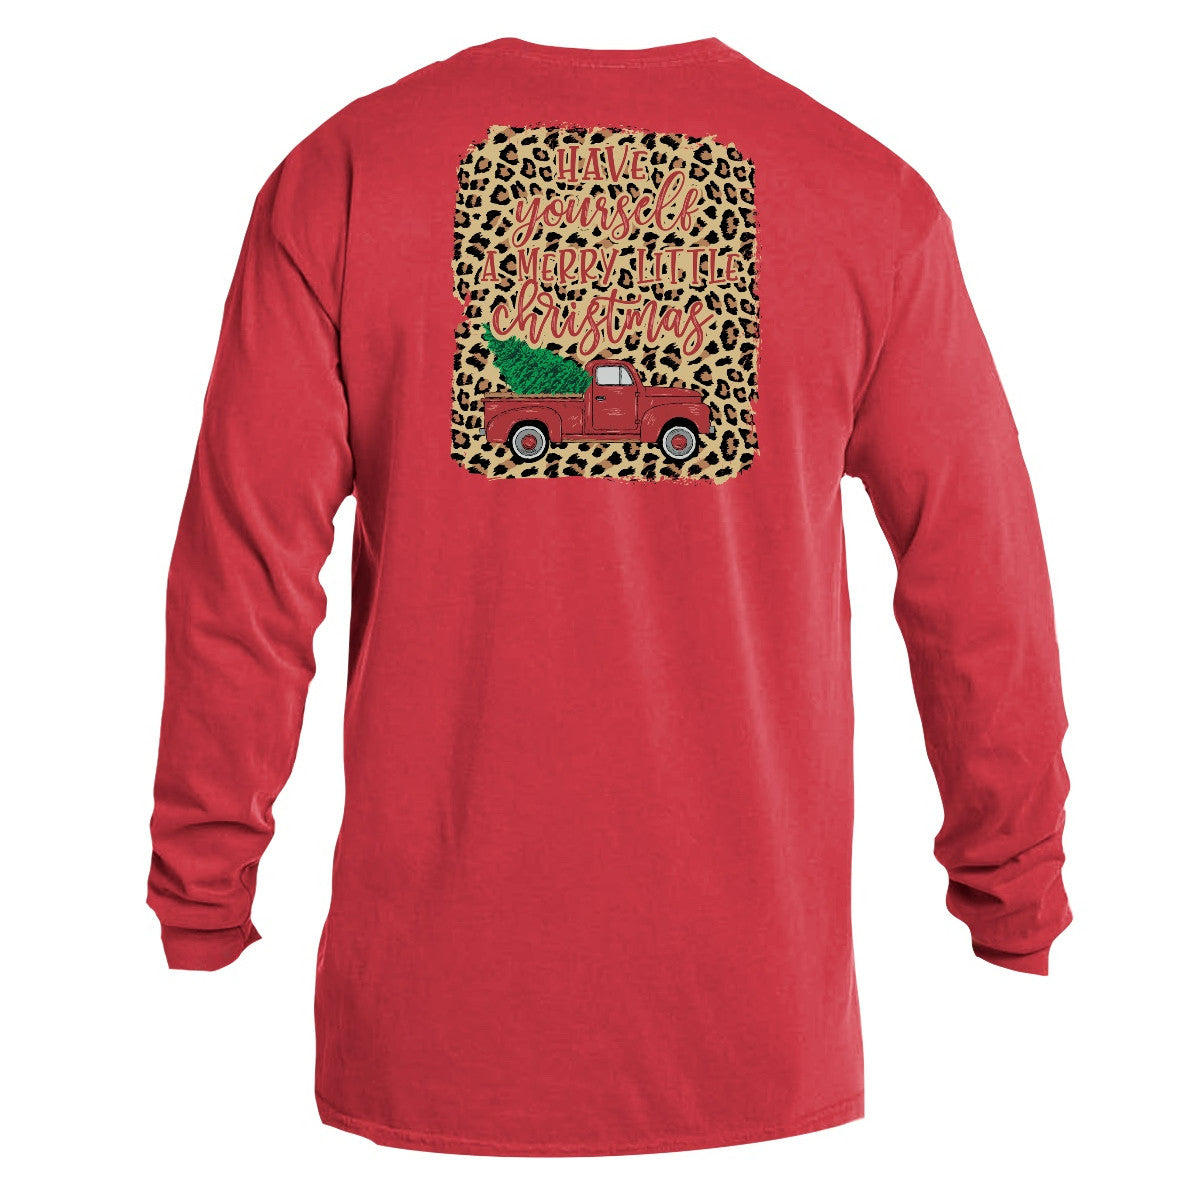 Jane Marie Have Yourself a Merry Christmas Long Sleeve T-Shirt - Red-JANE MARIE-Little Giant Kidz